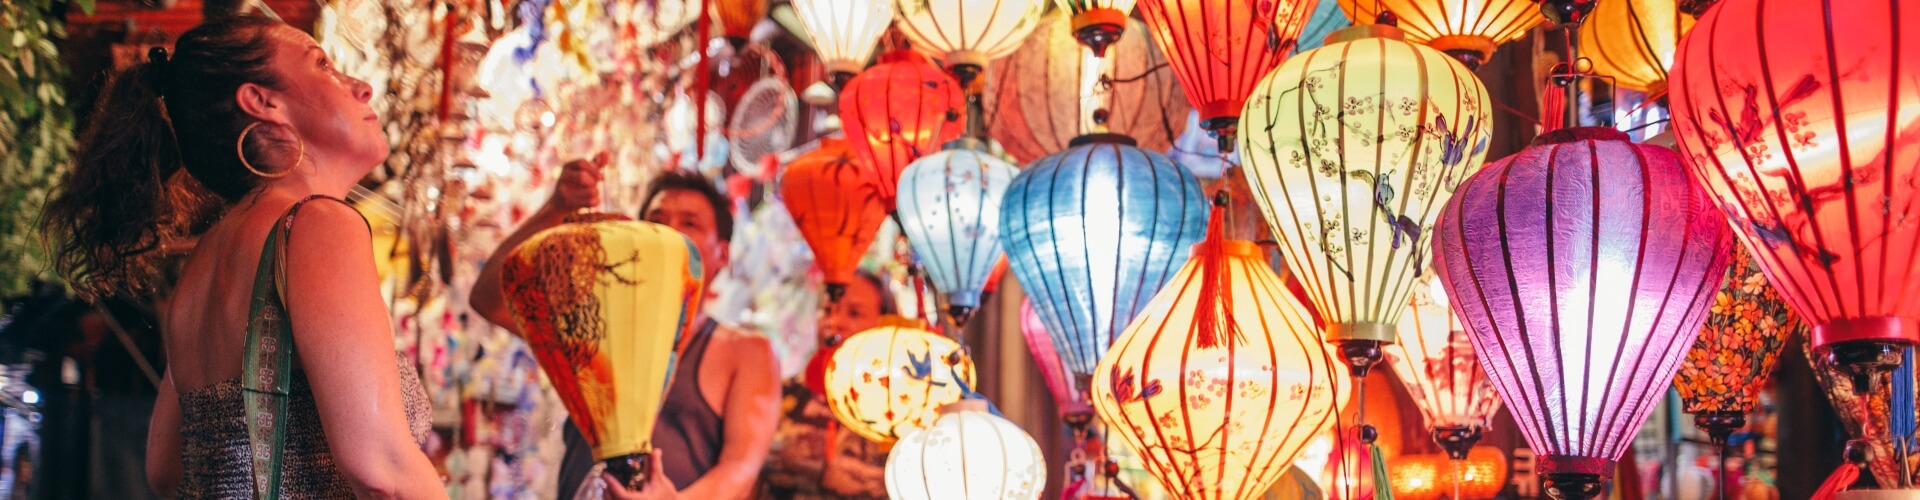 Woman looking at all the brightly coloured lanterns at a shop in Hoi An, Vietnam